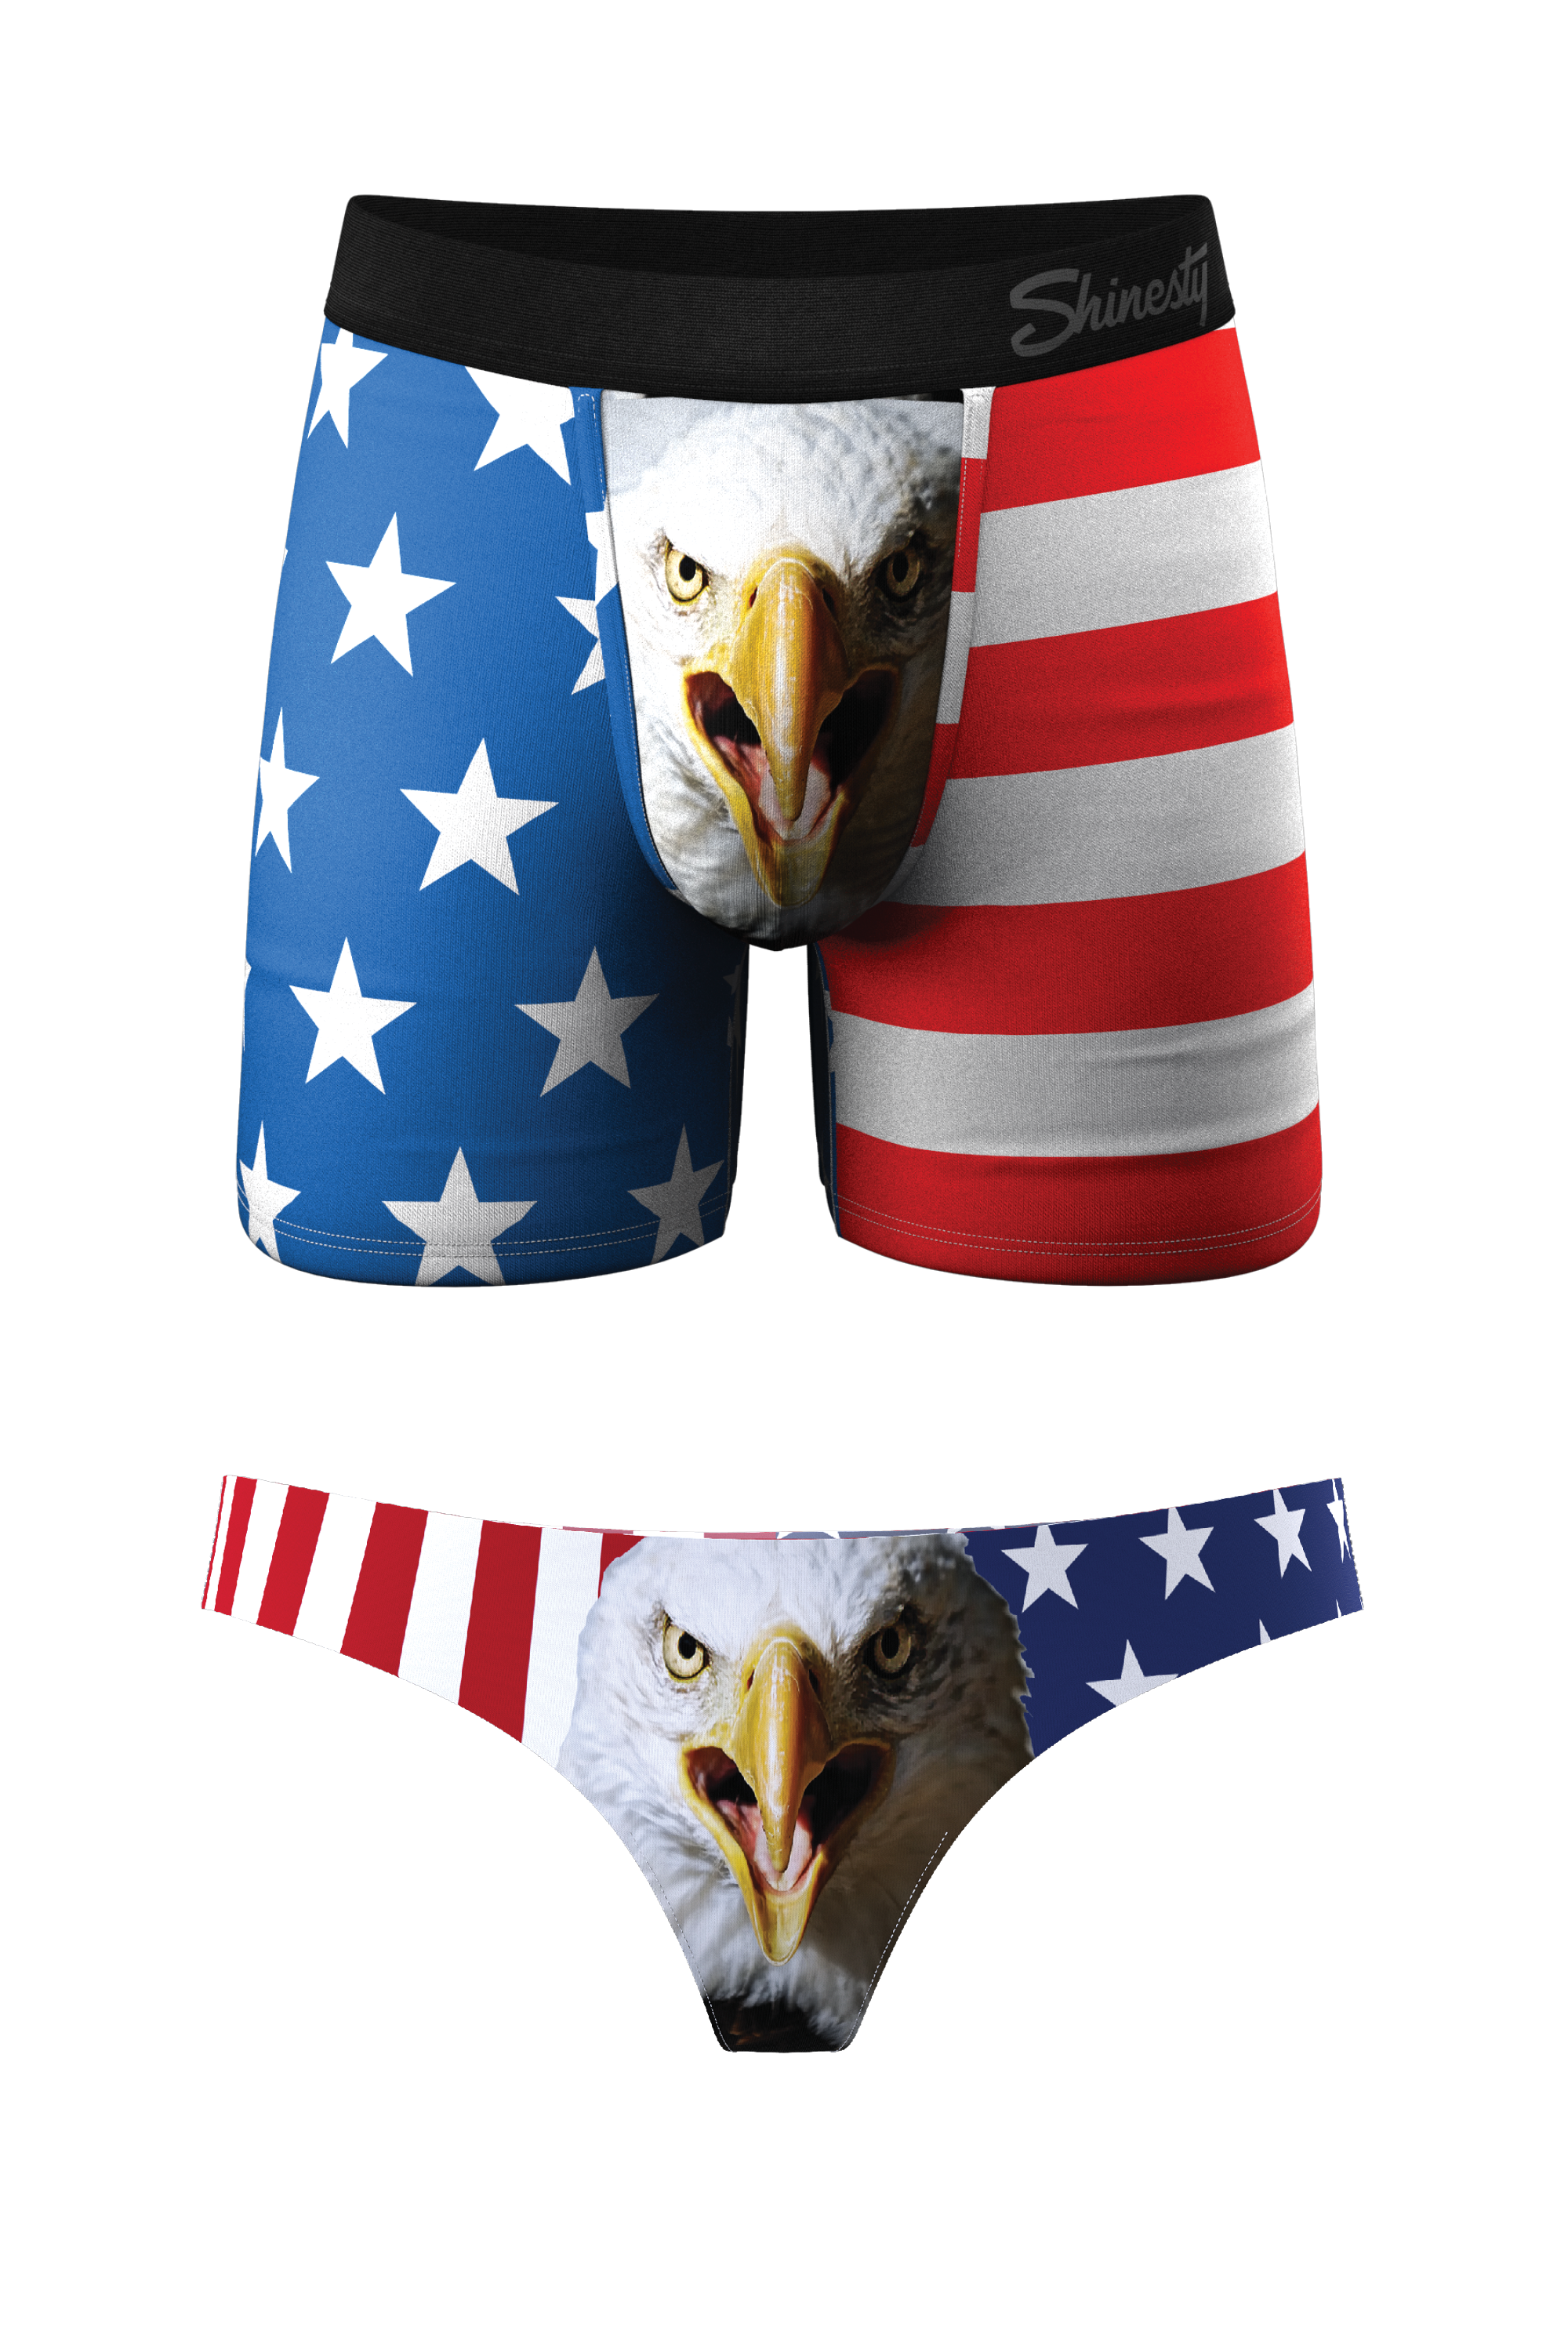  USA-SALES Couples Matching Underwear, Set of 2 Pieces